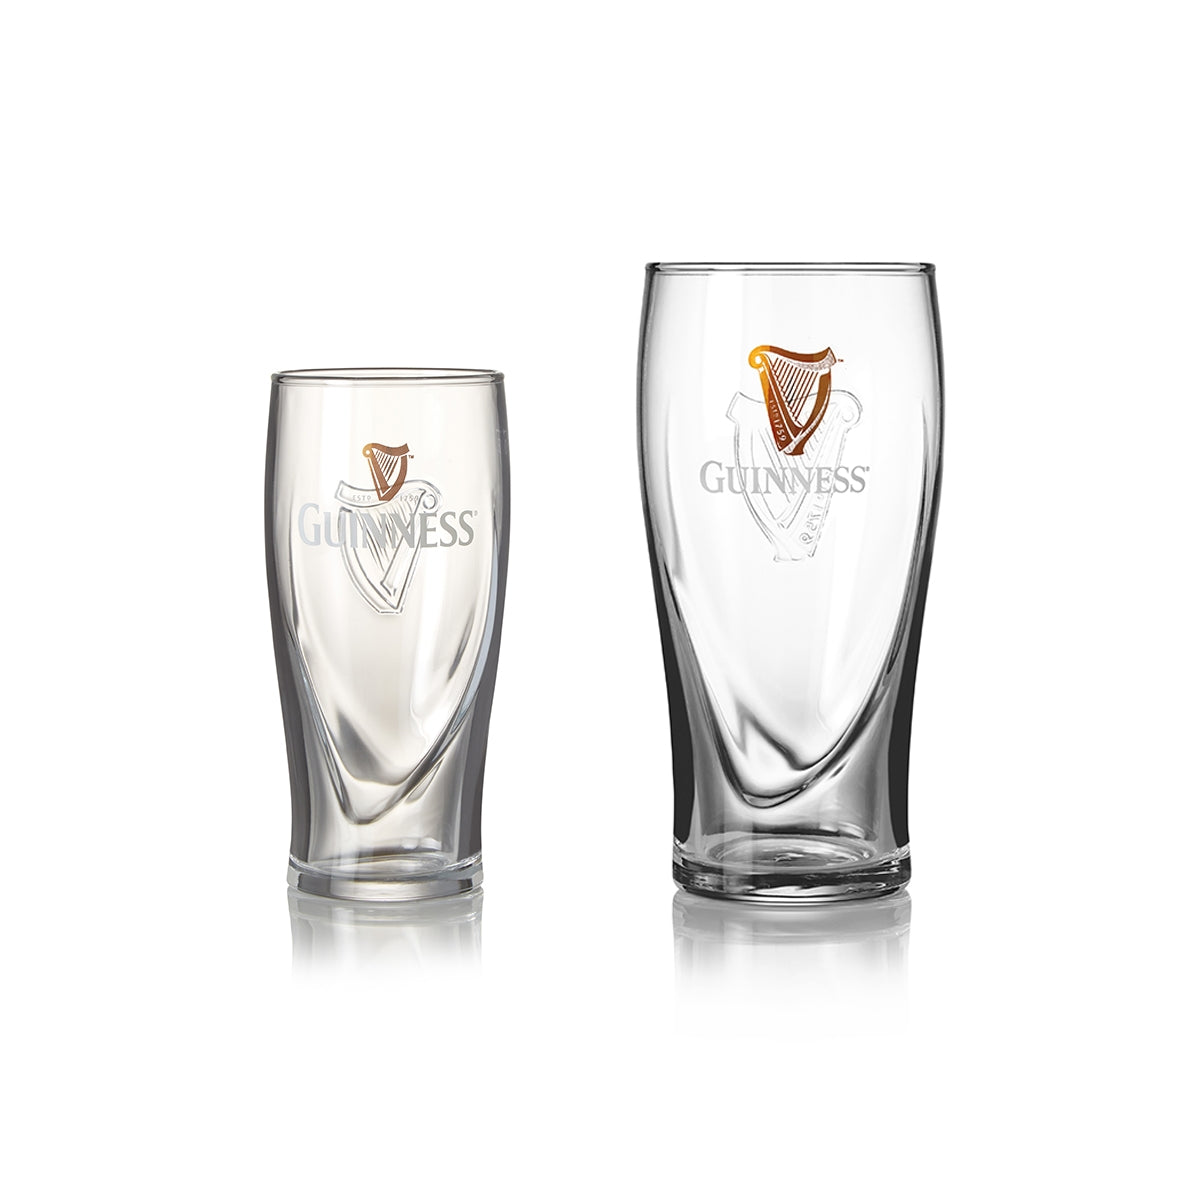 Two Guinness Half Pint Glass 2 Packs on a white surface.